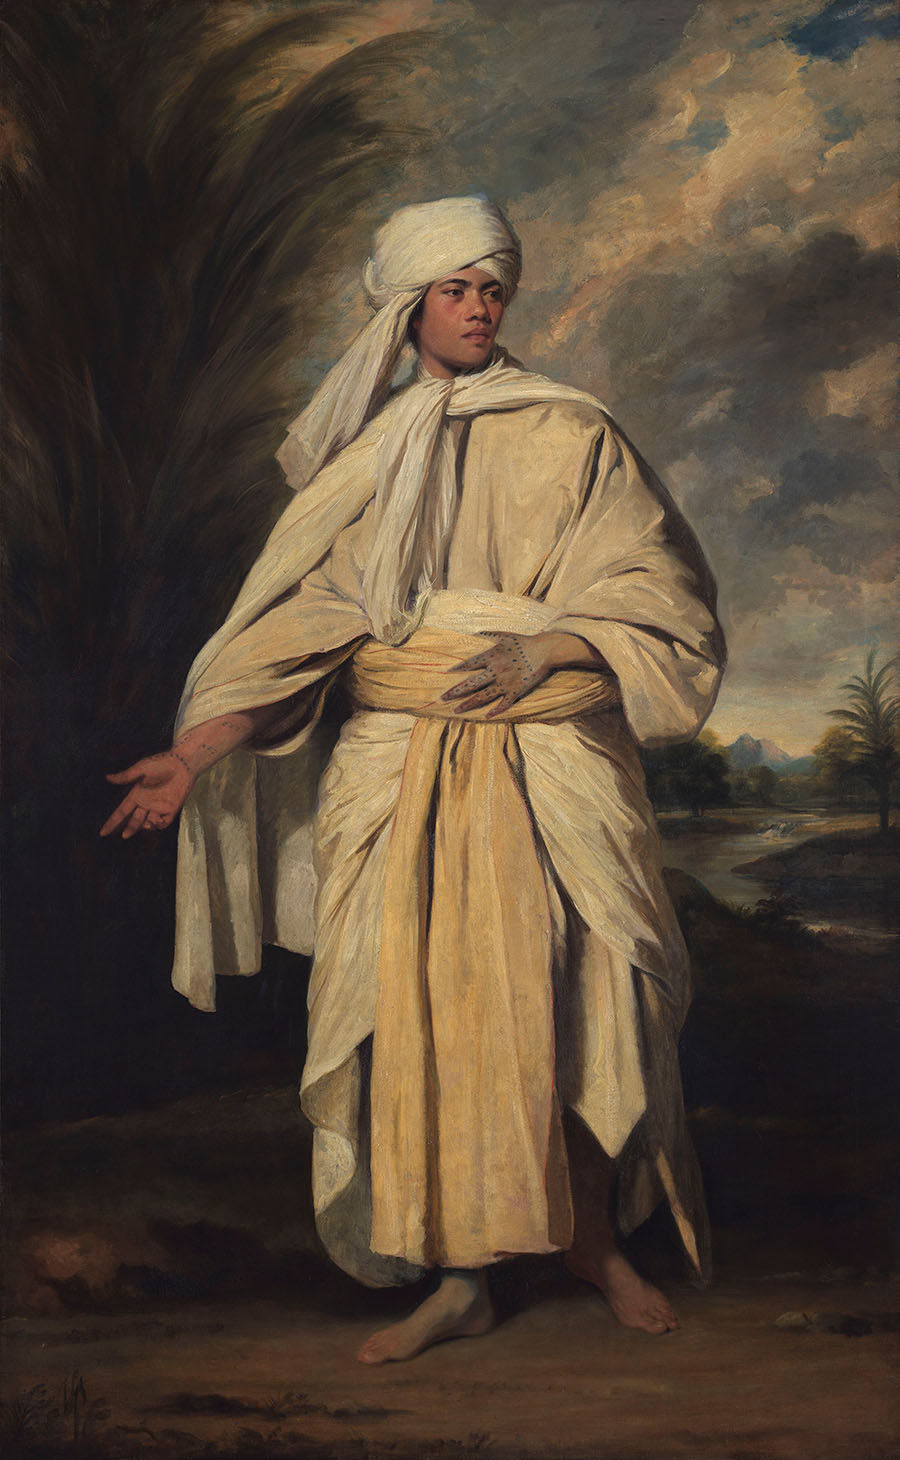 Photo of the Portrait of Mai: a person stands dressed in white robes